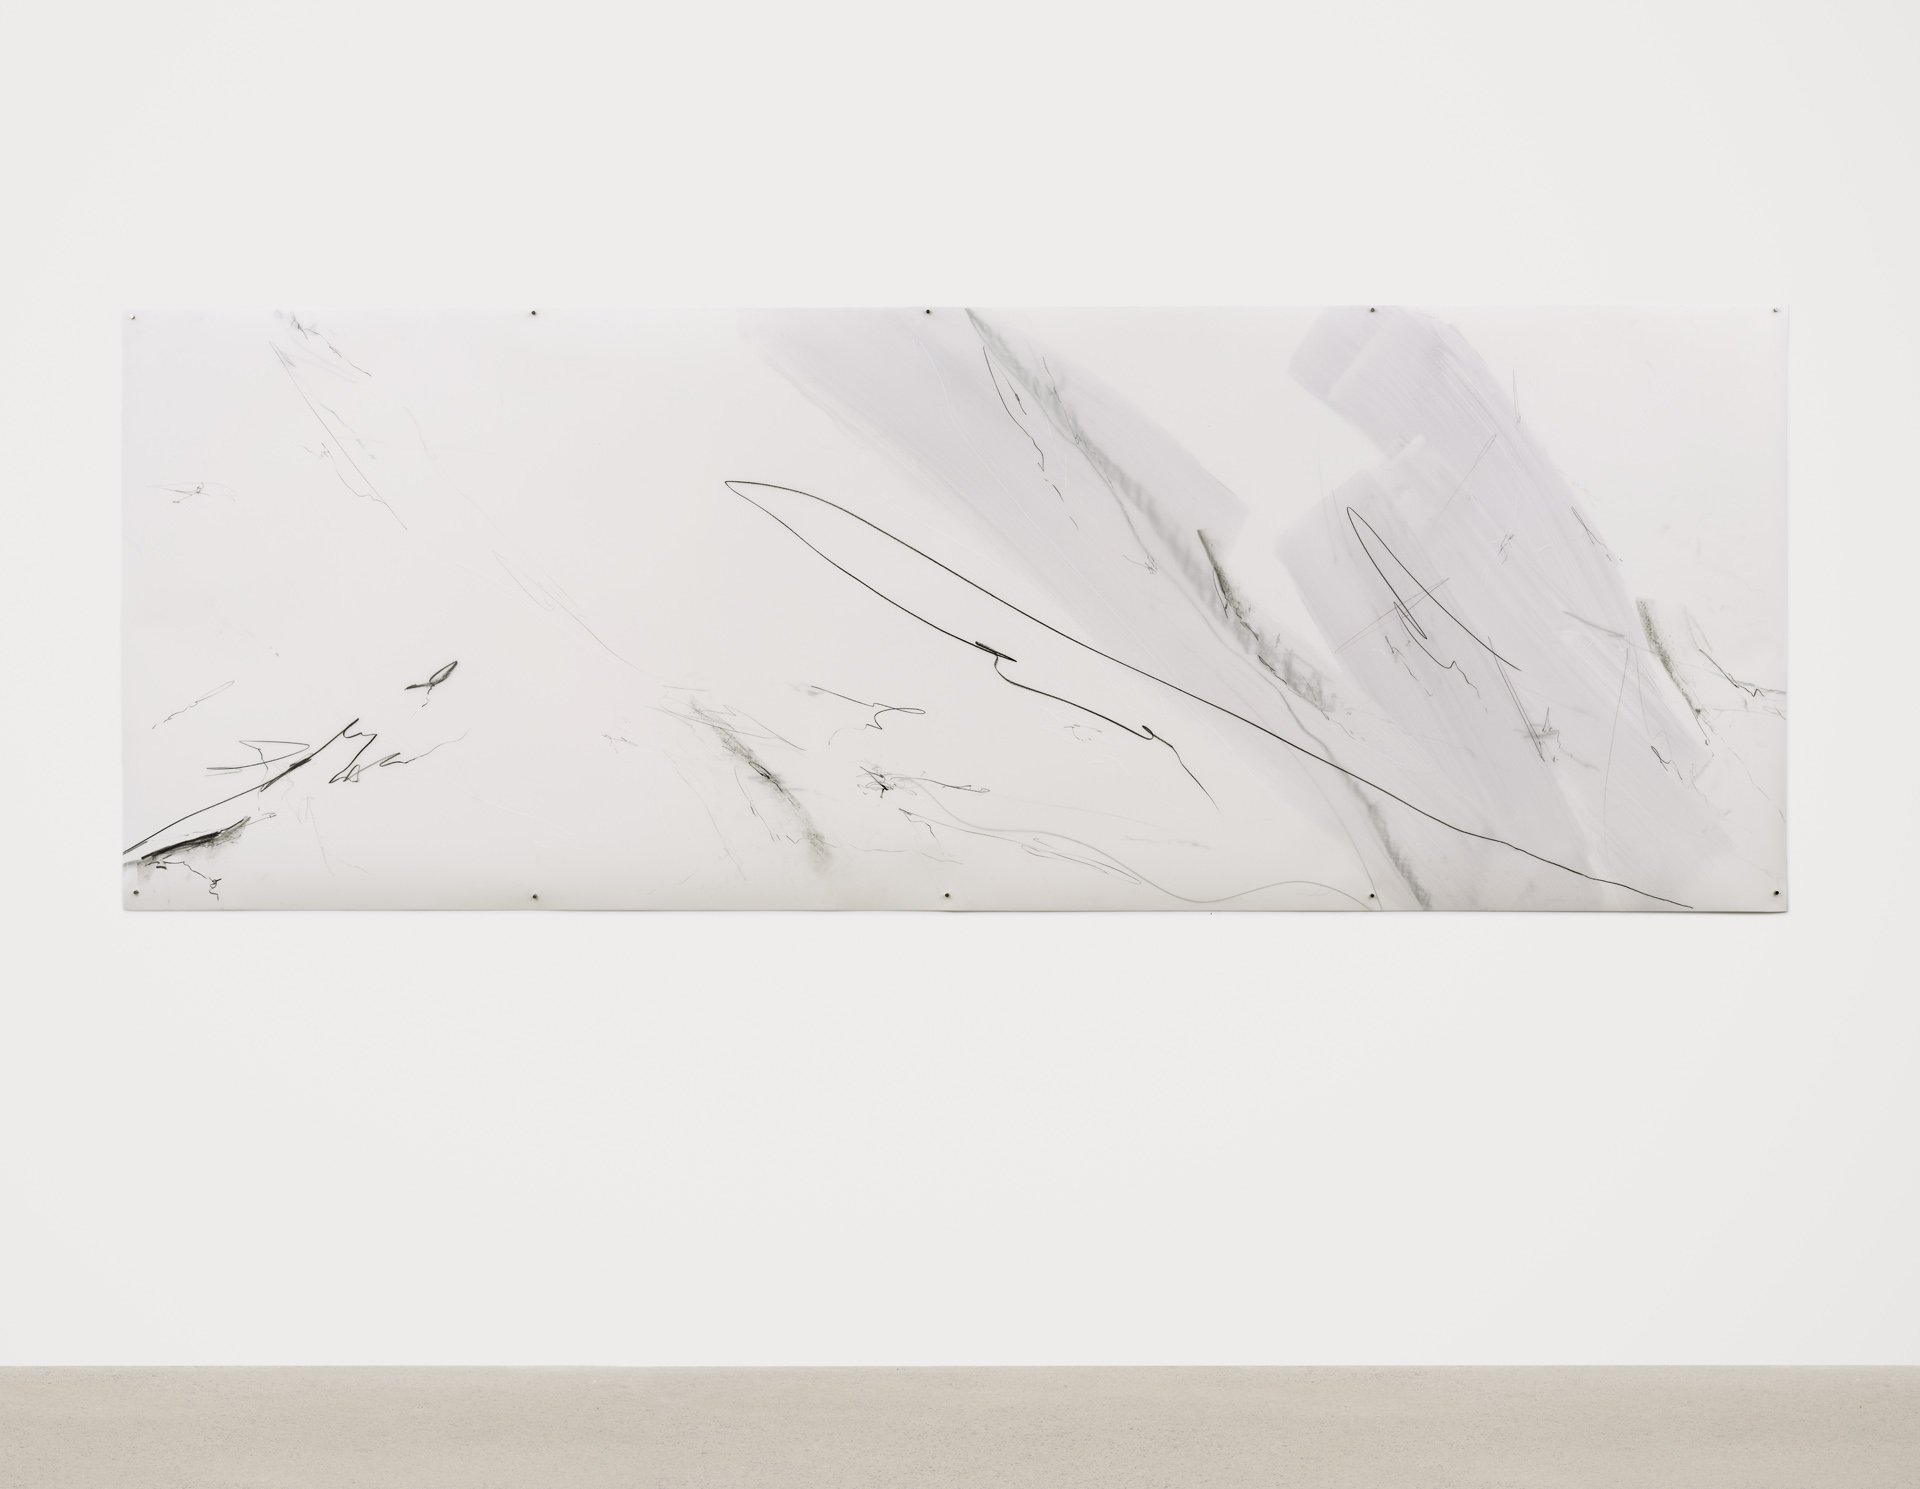  untitled  oil and graphite on mylar, 112” x 40”  Image by Rachel Topham Photography 